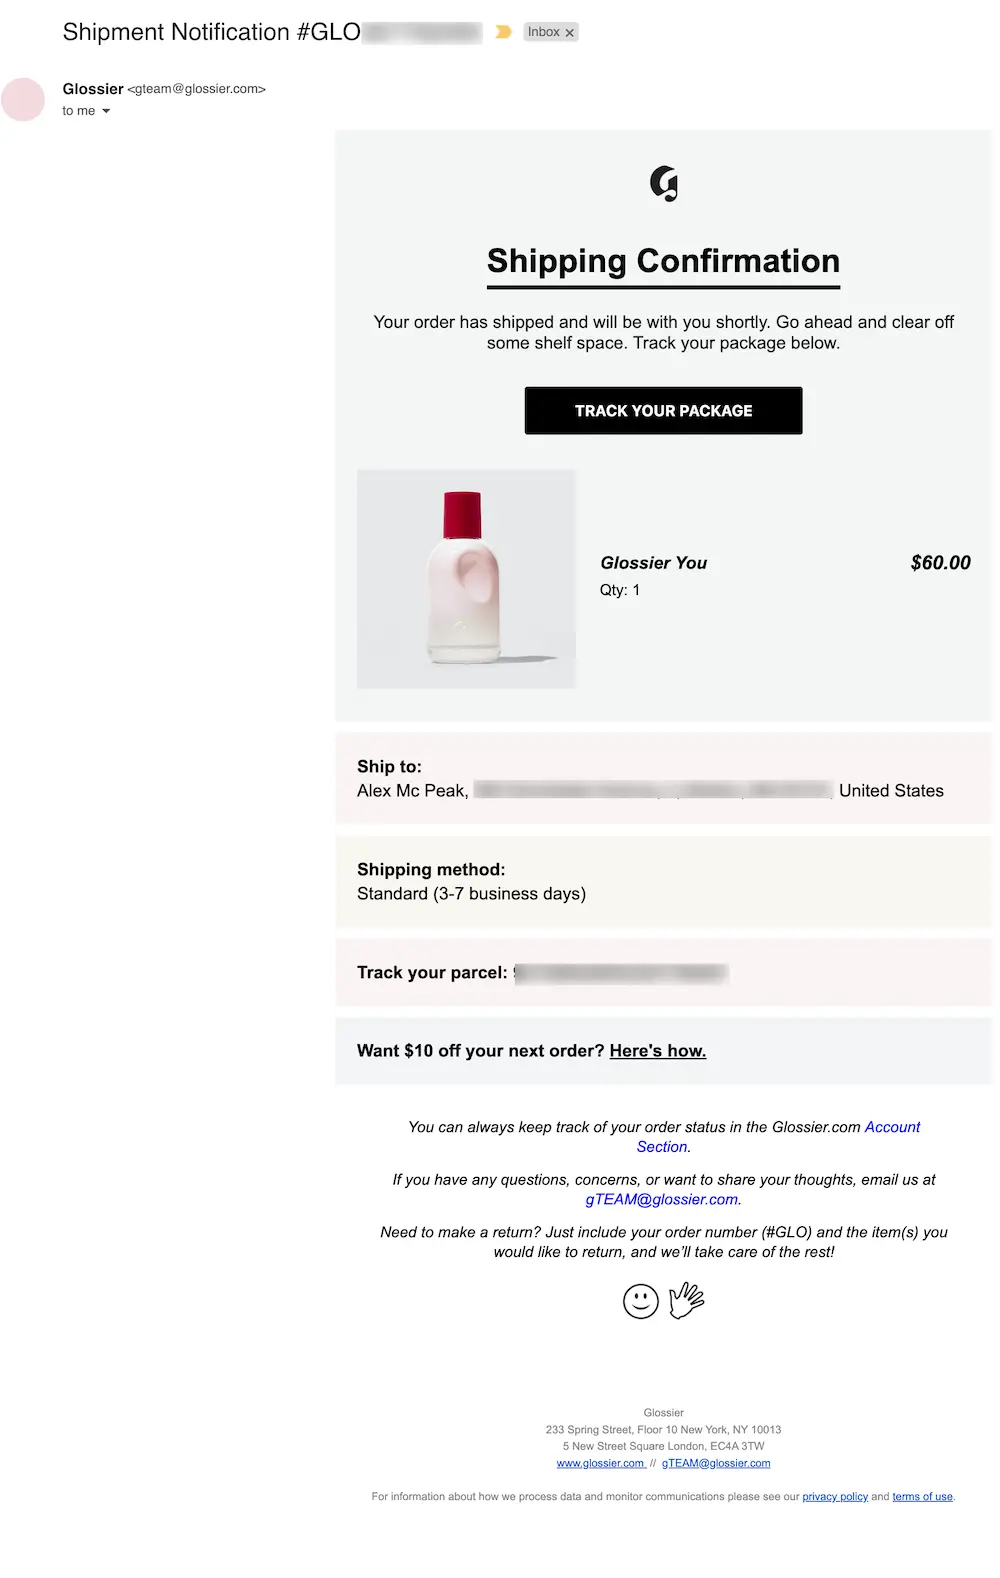 Glossier's shipping confirmation email emphasizes the product and the tracking link but also includes important shipping information, expected delivery date, return information, and support contact details. Glossier also encourages customers to make their next purchase by offering them a $10 discount.